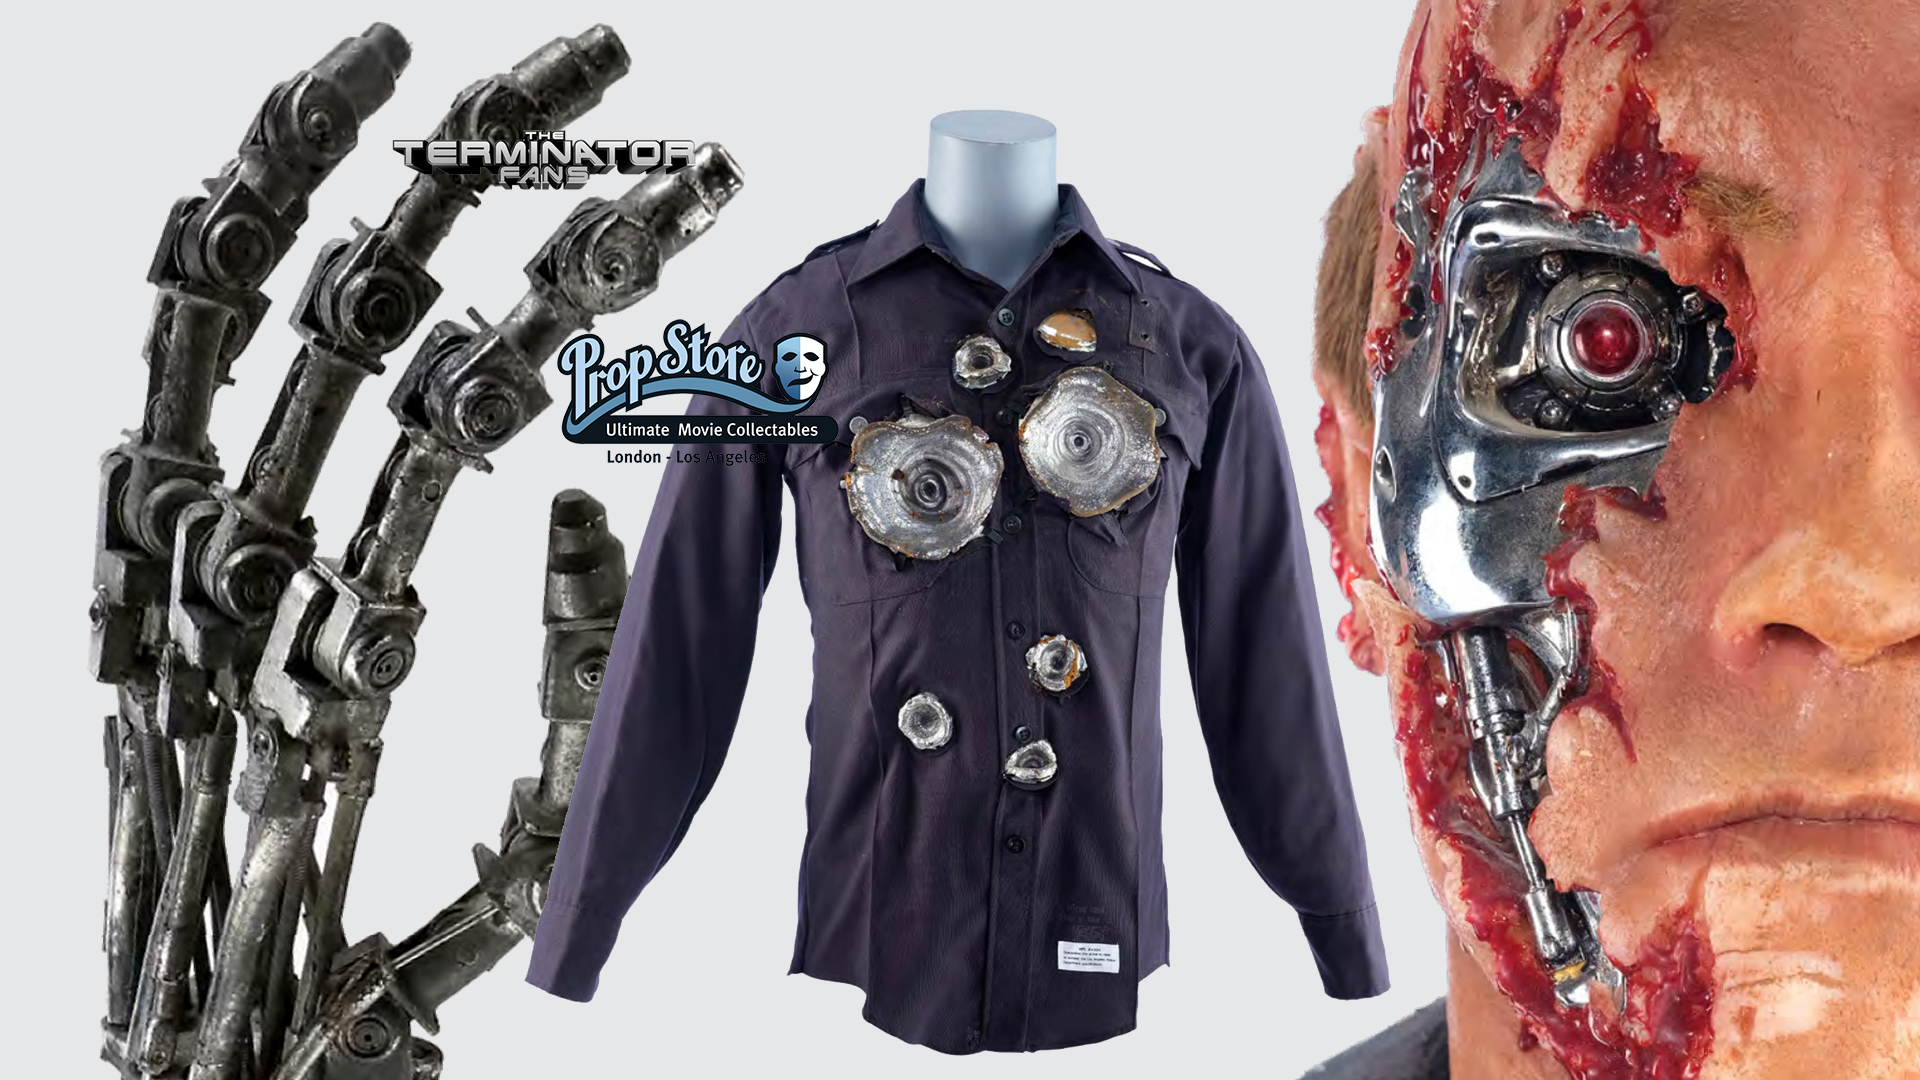 Prop Store: Iconic Terminator Items Go Up For Auction